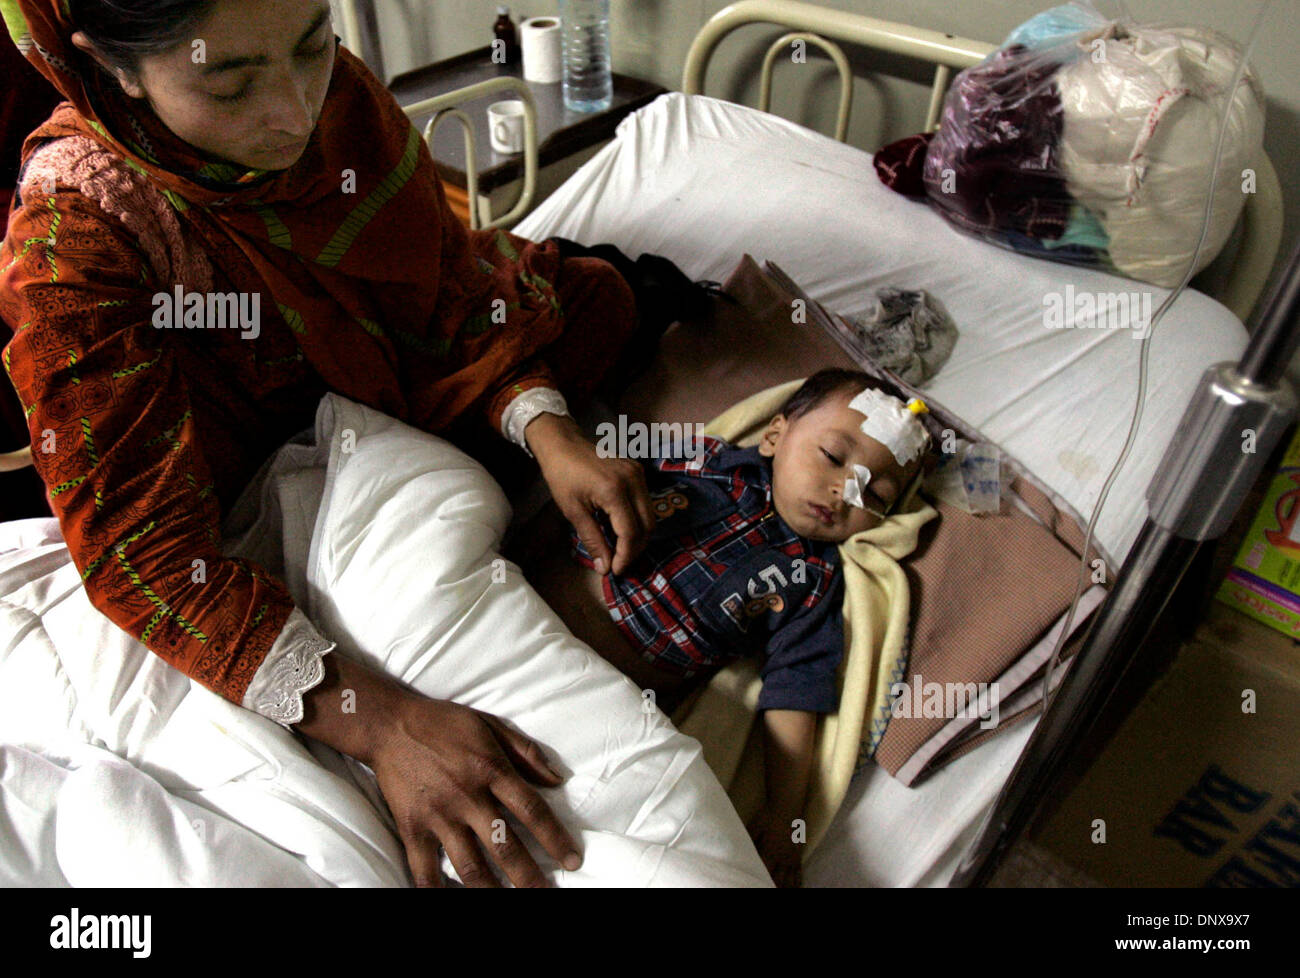 Dec 02, 2005; Islamabad, PAKISTAN; Aftermath of Pakistan earthquake on October 8, 2005. ADNAN (cq,age1) from Muzaffarabad, rests while at the Pakistan Institute of Medical Sciences Hospital  in Islamabad. ADNAN along with his family were living on the roof top when the earthquake hit , and he fell from the roof onto the ground.  ADNAN had to have surgery to his stomach to help repa Stock Photo